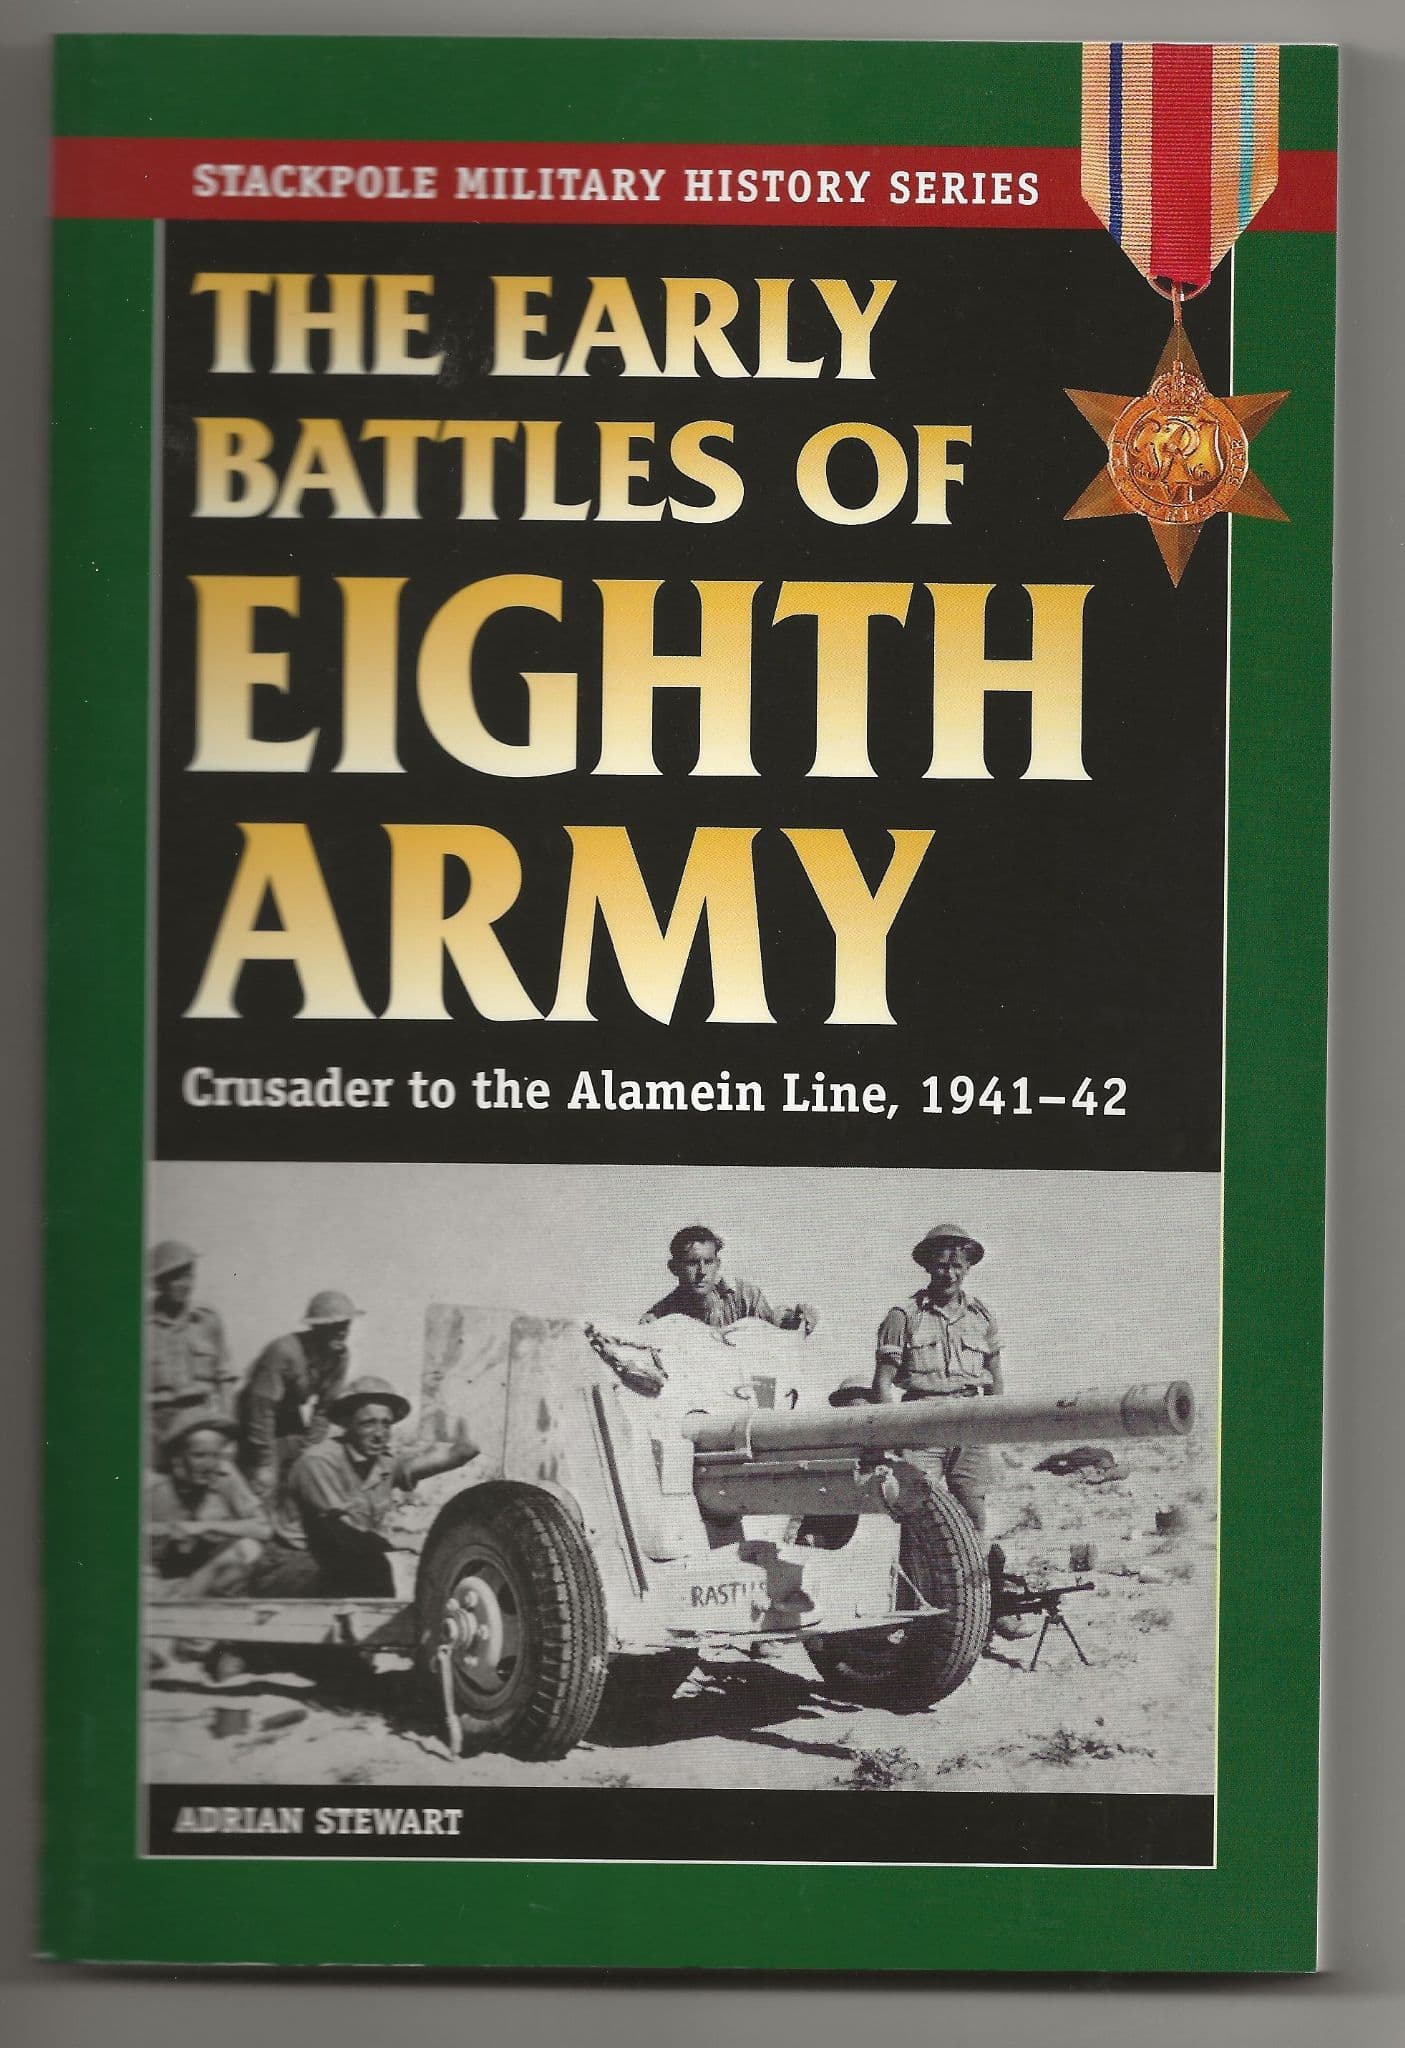 Stackpole: The Early Battles of Eight Army: Crusader to the Alamein Line, 1941-42